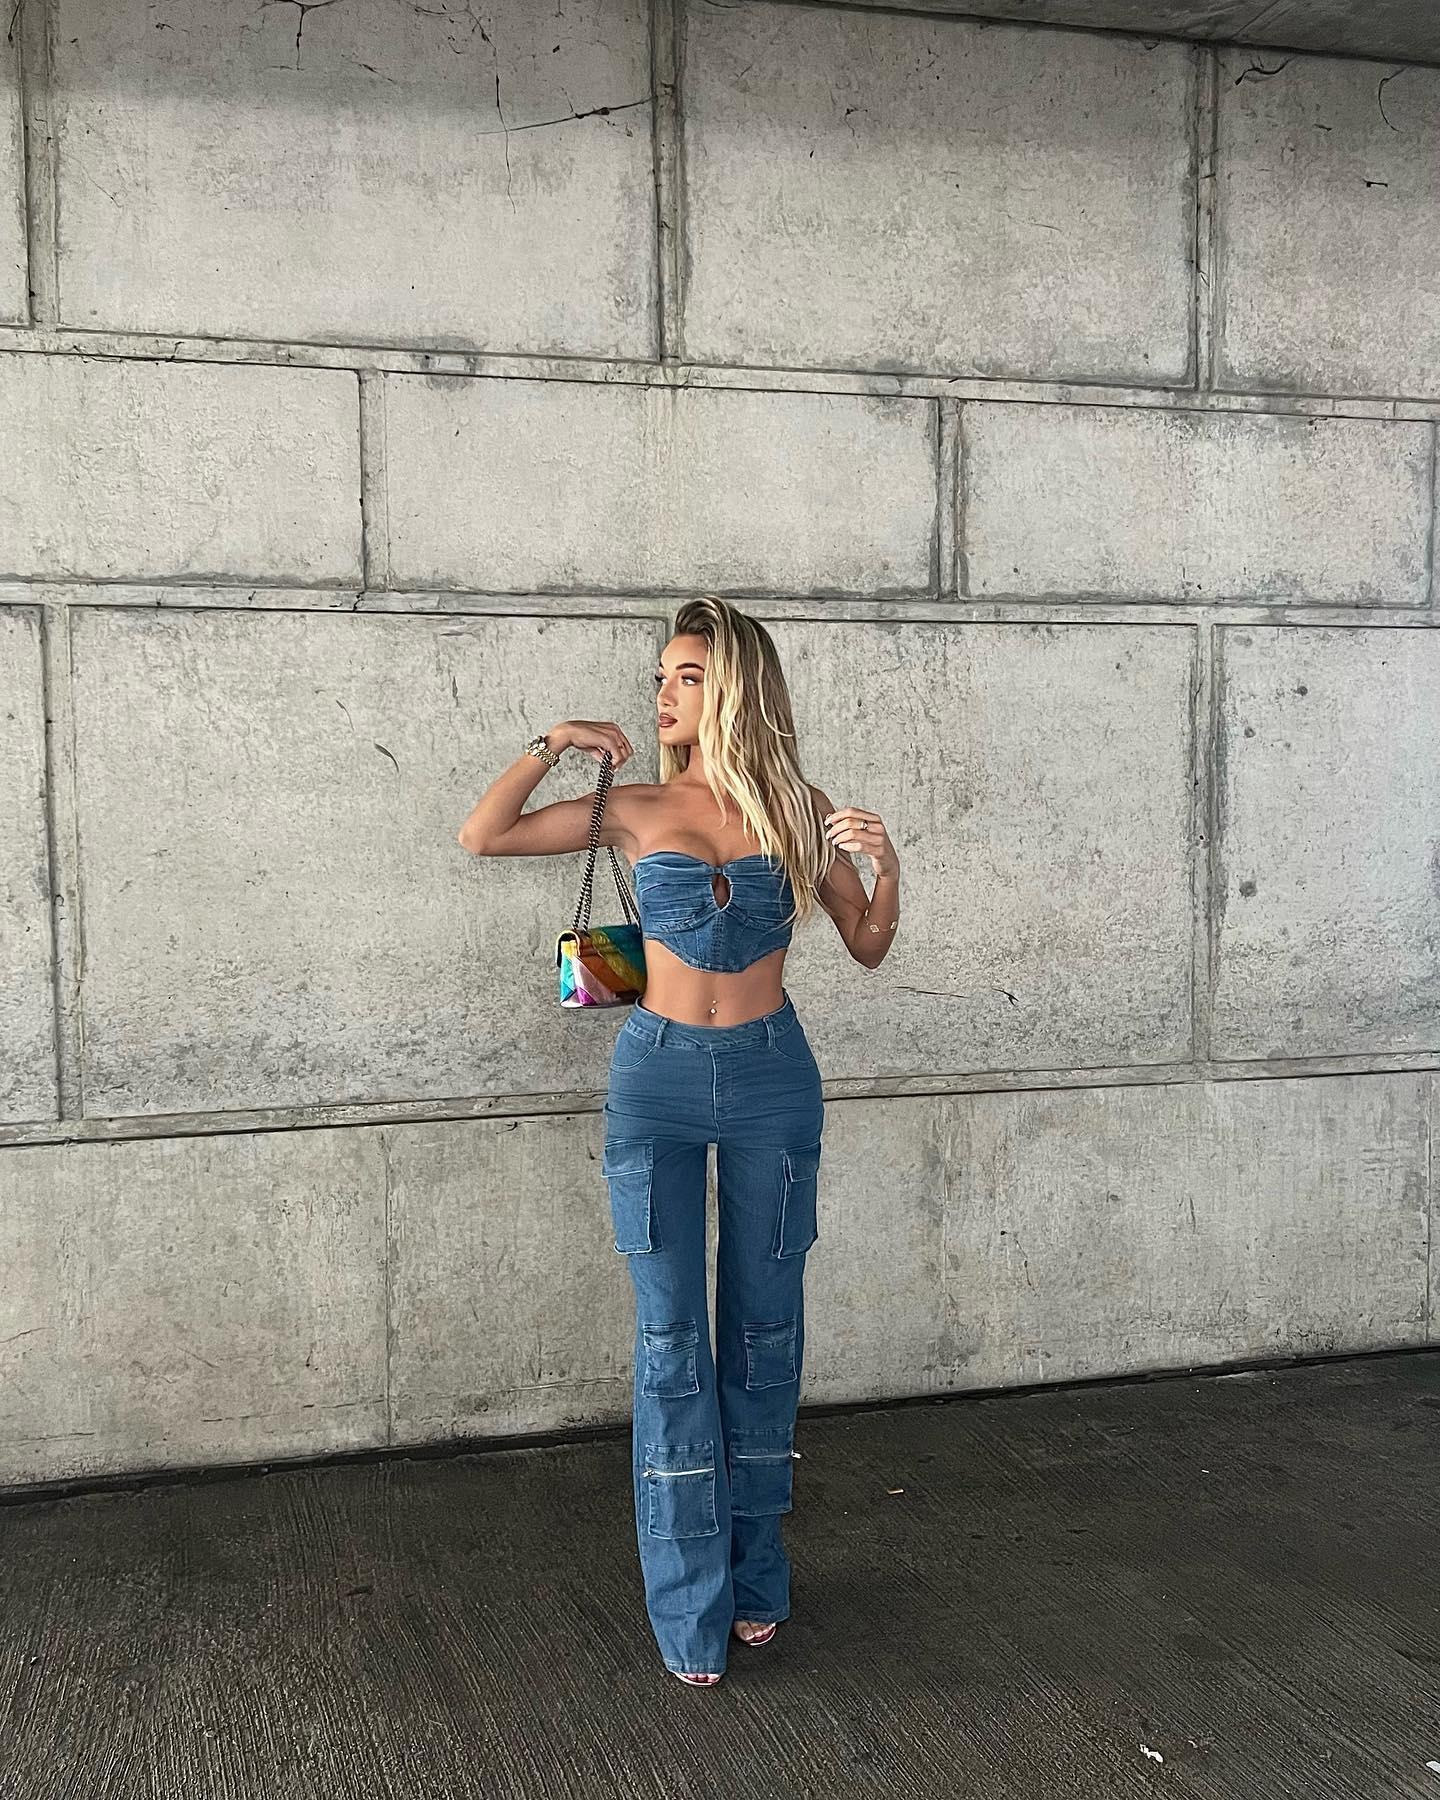 Beaux Raymond poses in a strapless denim crop top